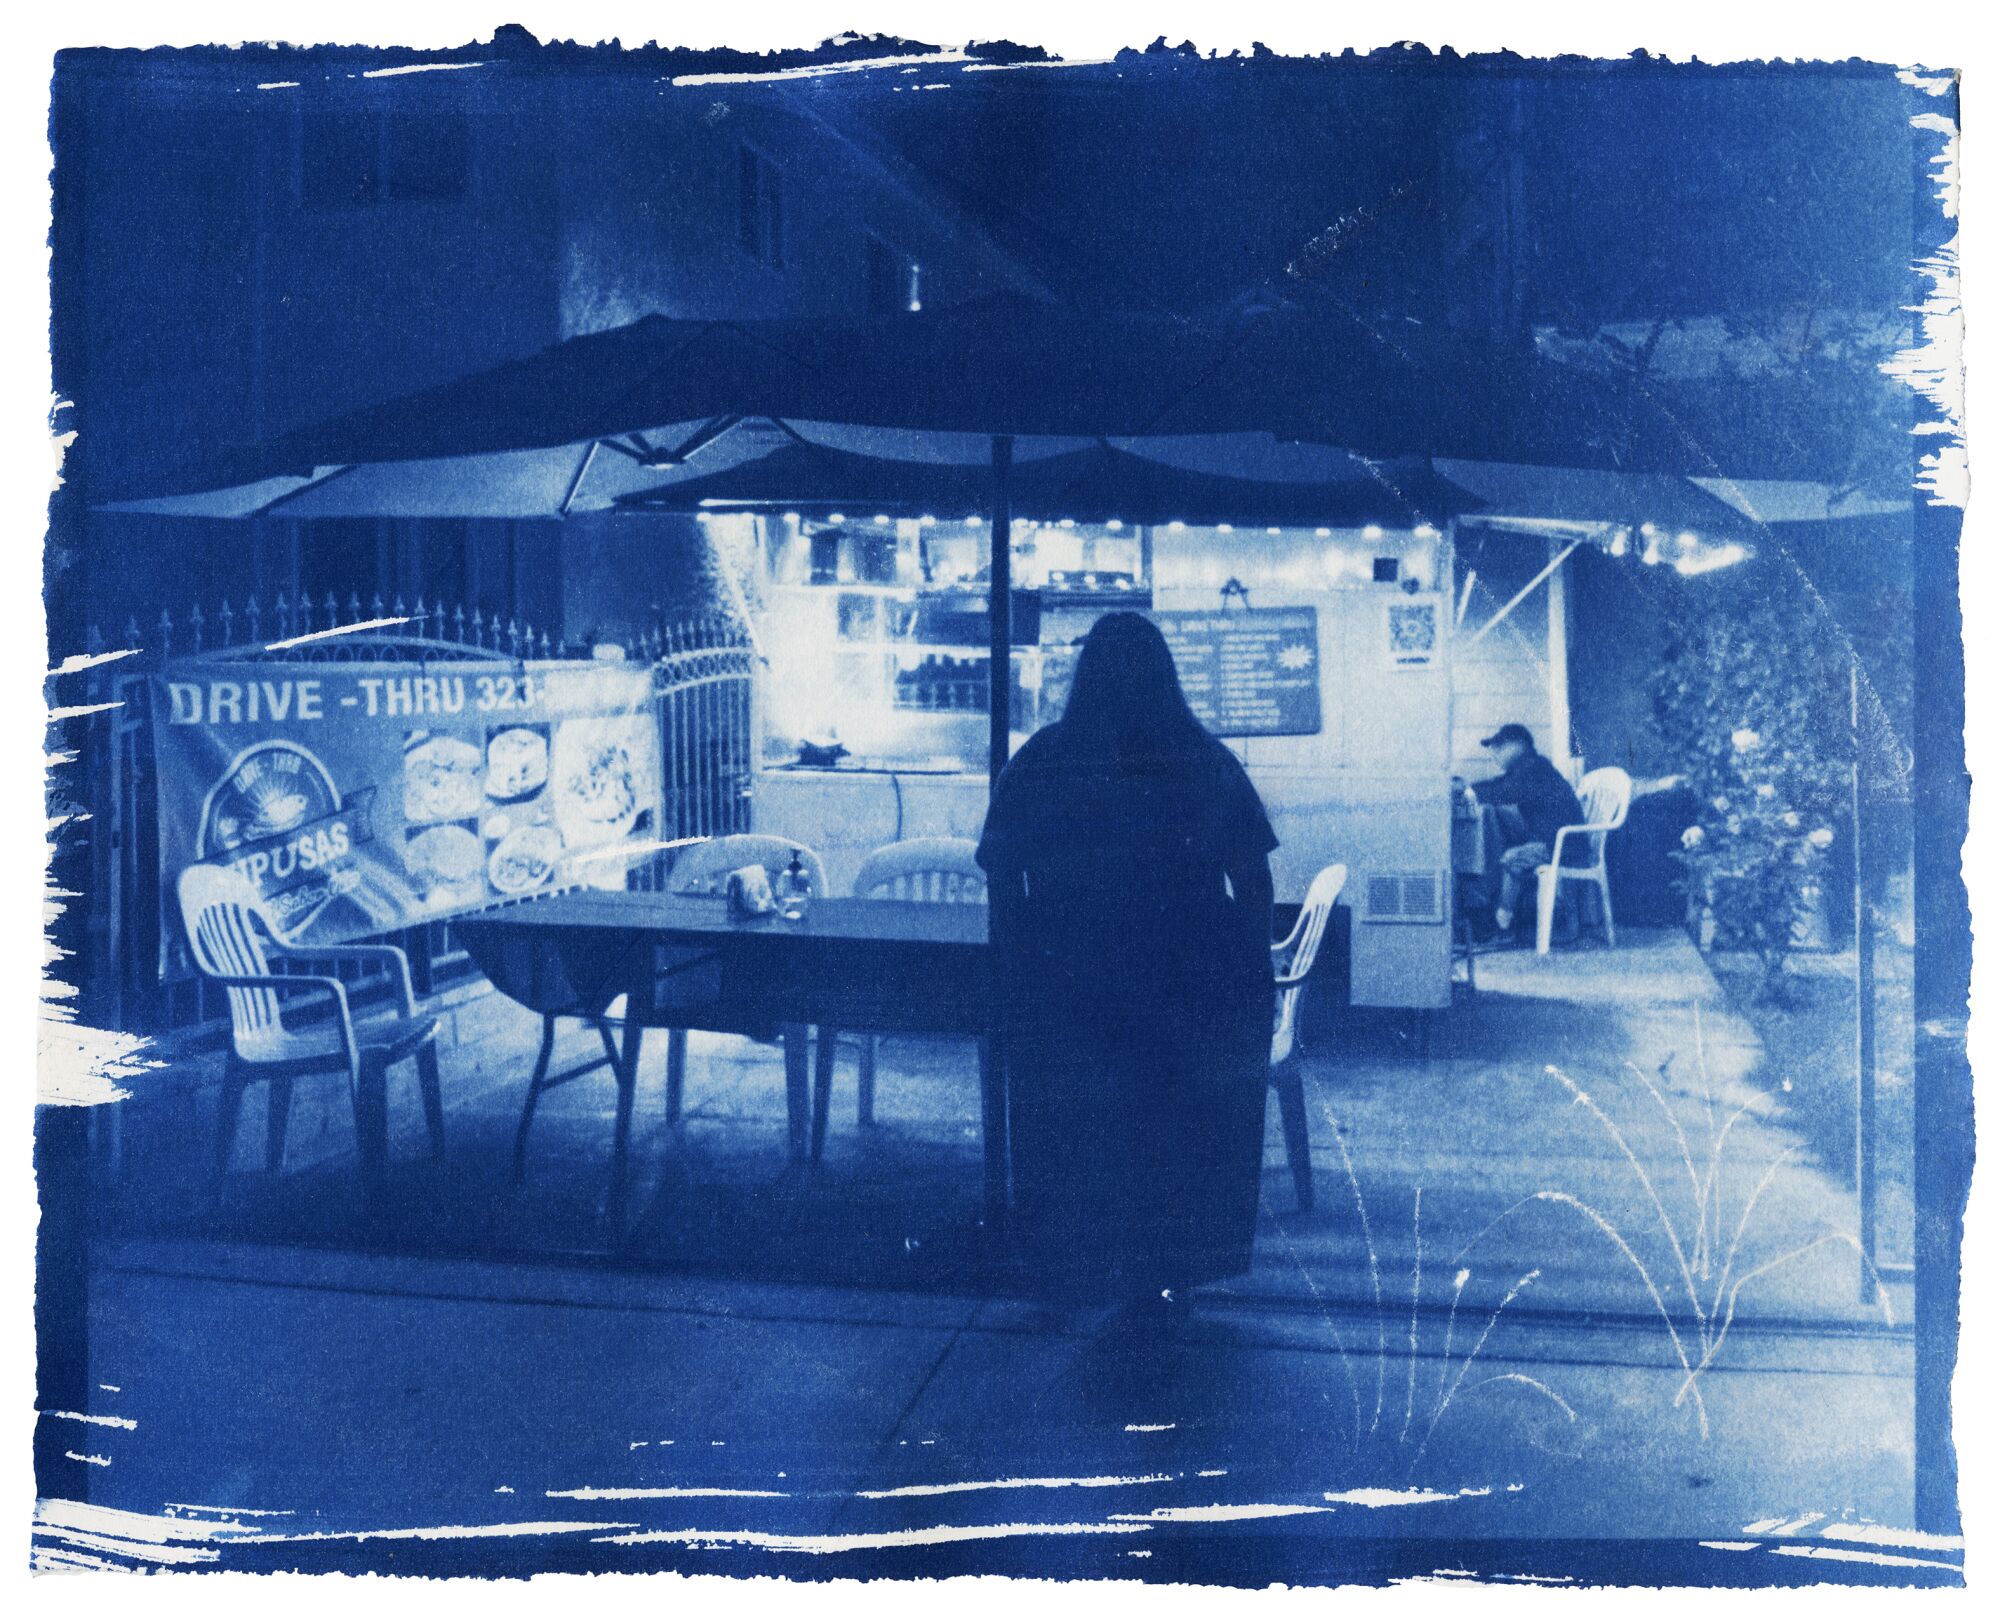 A cyanotype print of waiting for pupusas revueltas at an L.A. driveway